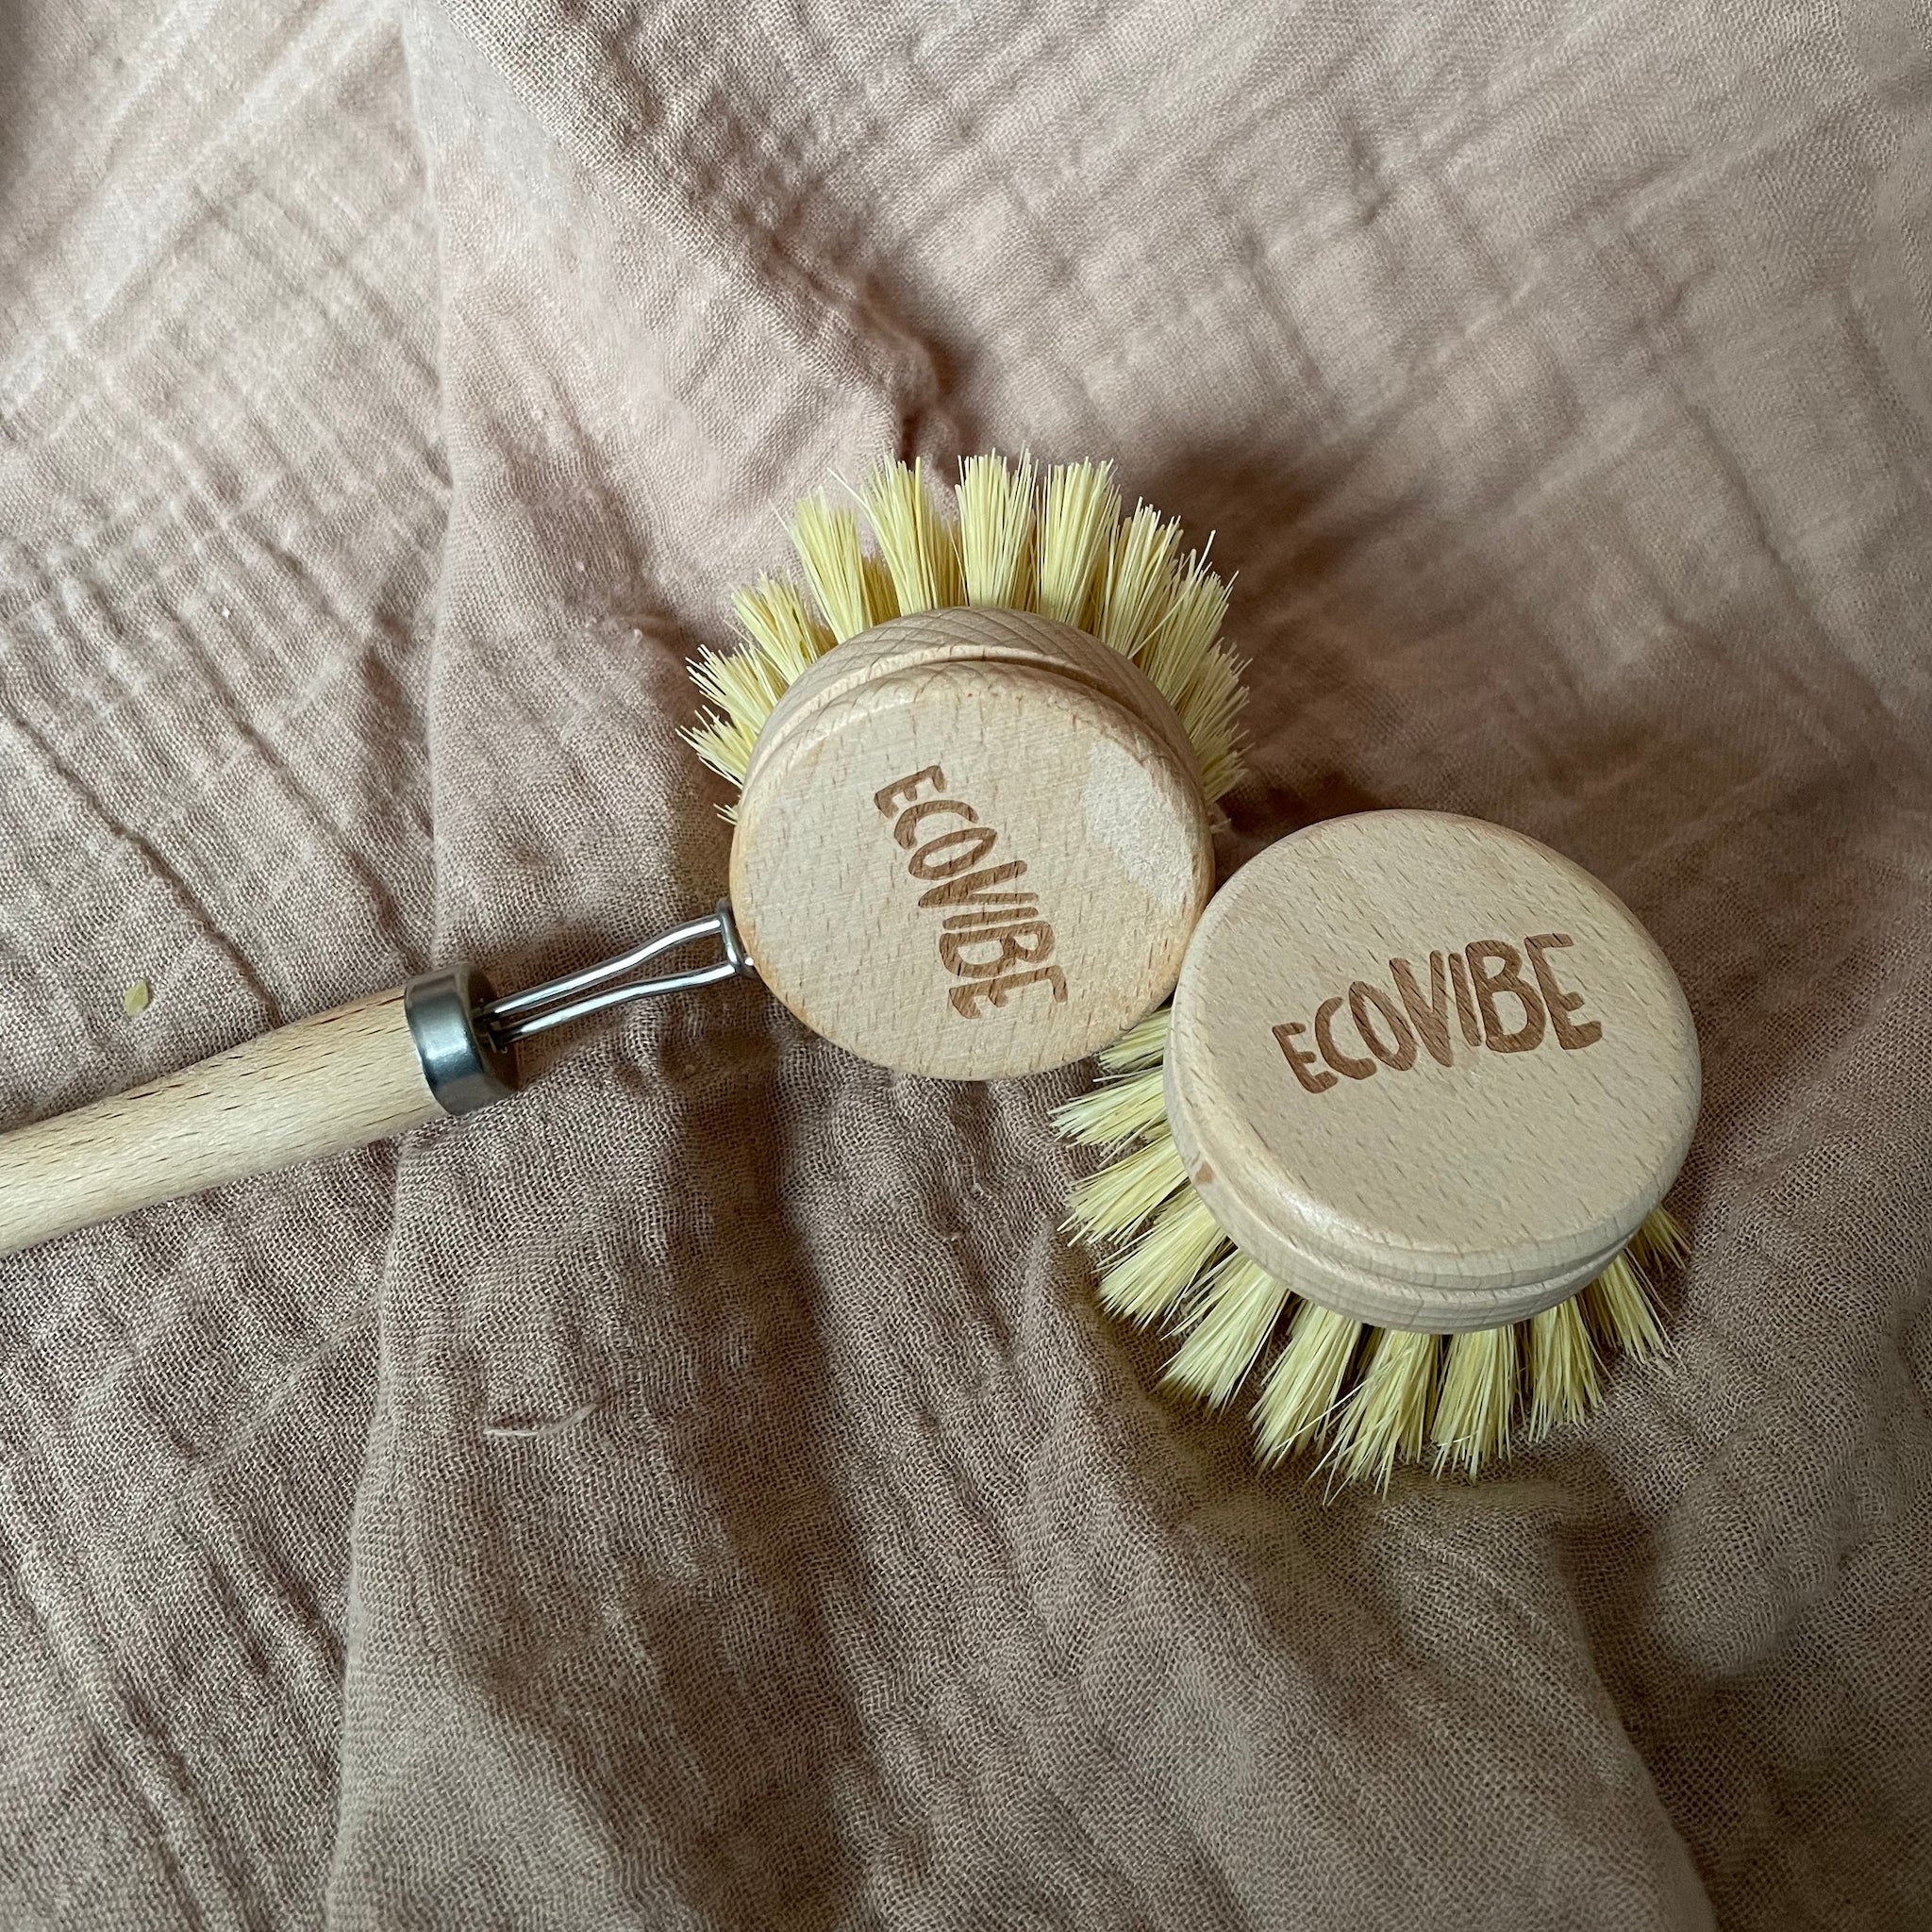 EcoVibe Wooden Dish Brush- replacement head